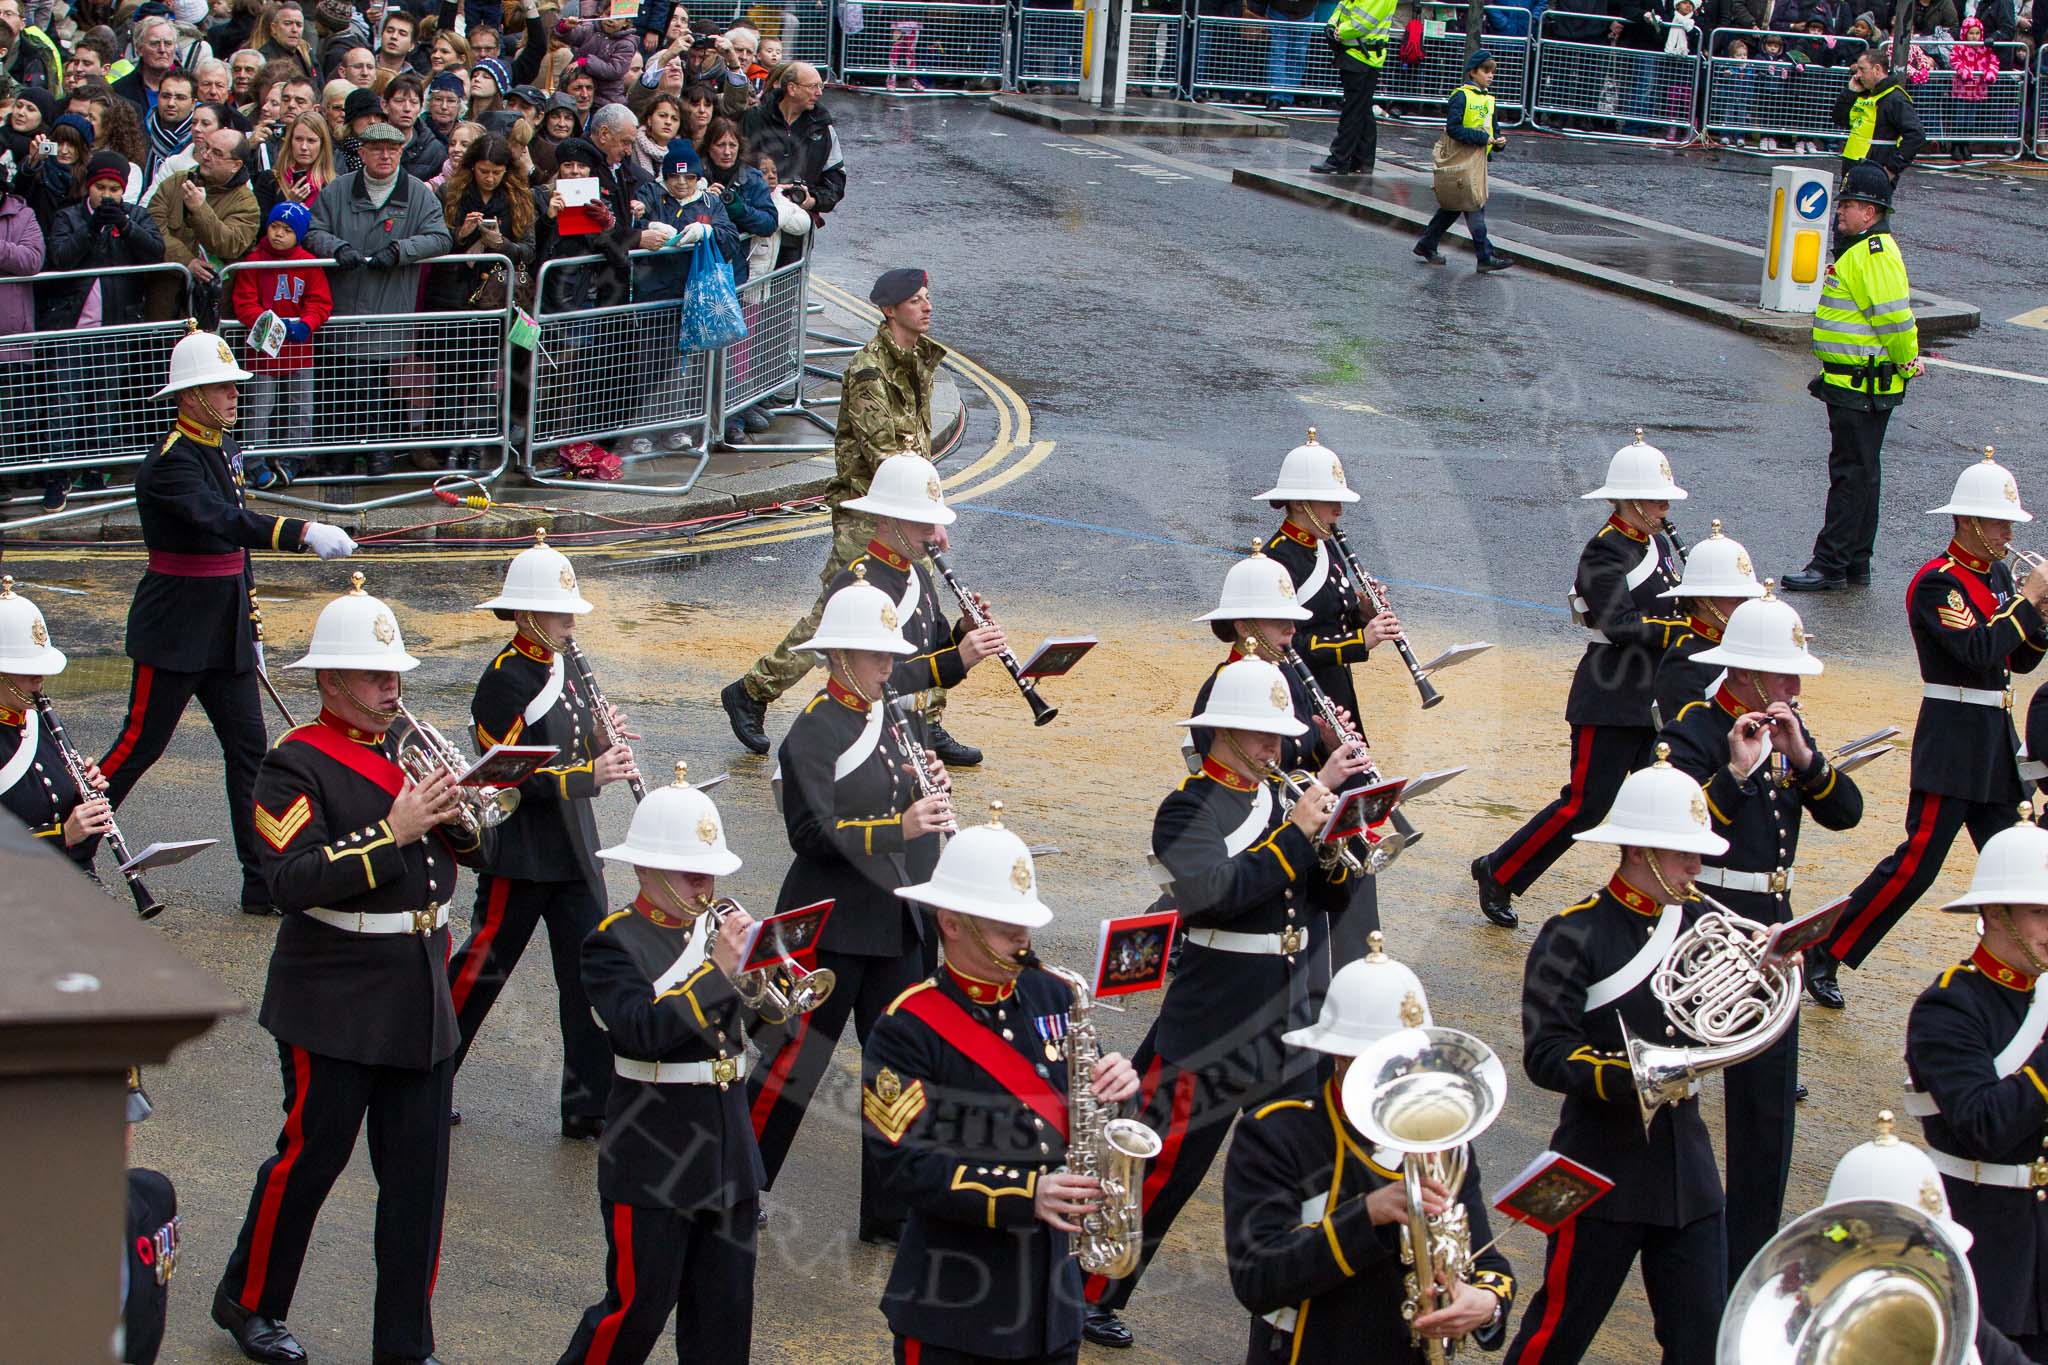 Lord Mayor's Show 2012: Entry 86 - Royal Marines Band (HMS Collingwood)..
Press stand opposite Mansion House, City of London,
London,
Greater London,
United Kingdom,
on 10 November 2012 at 11:38, image #1140